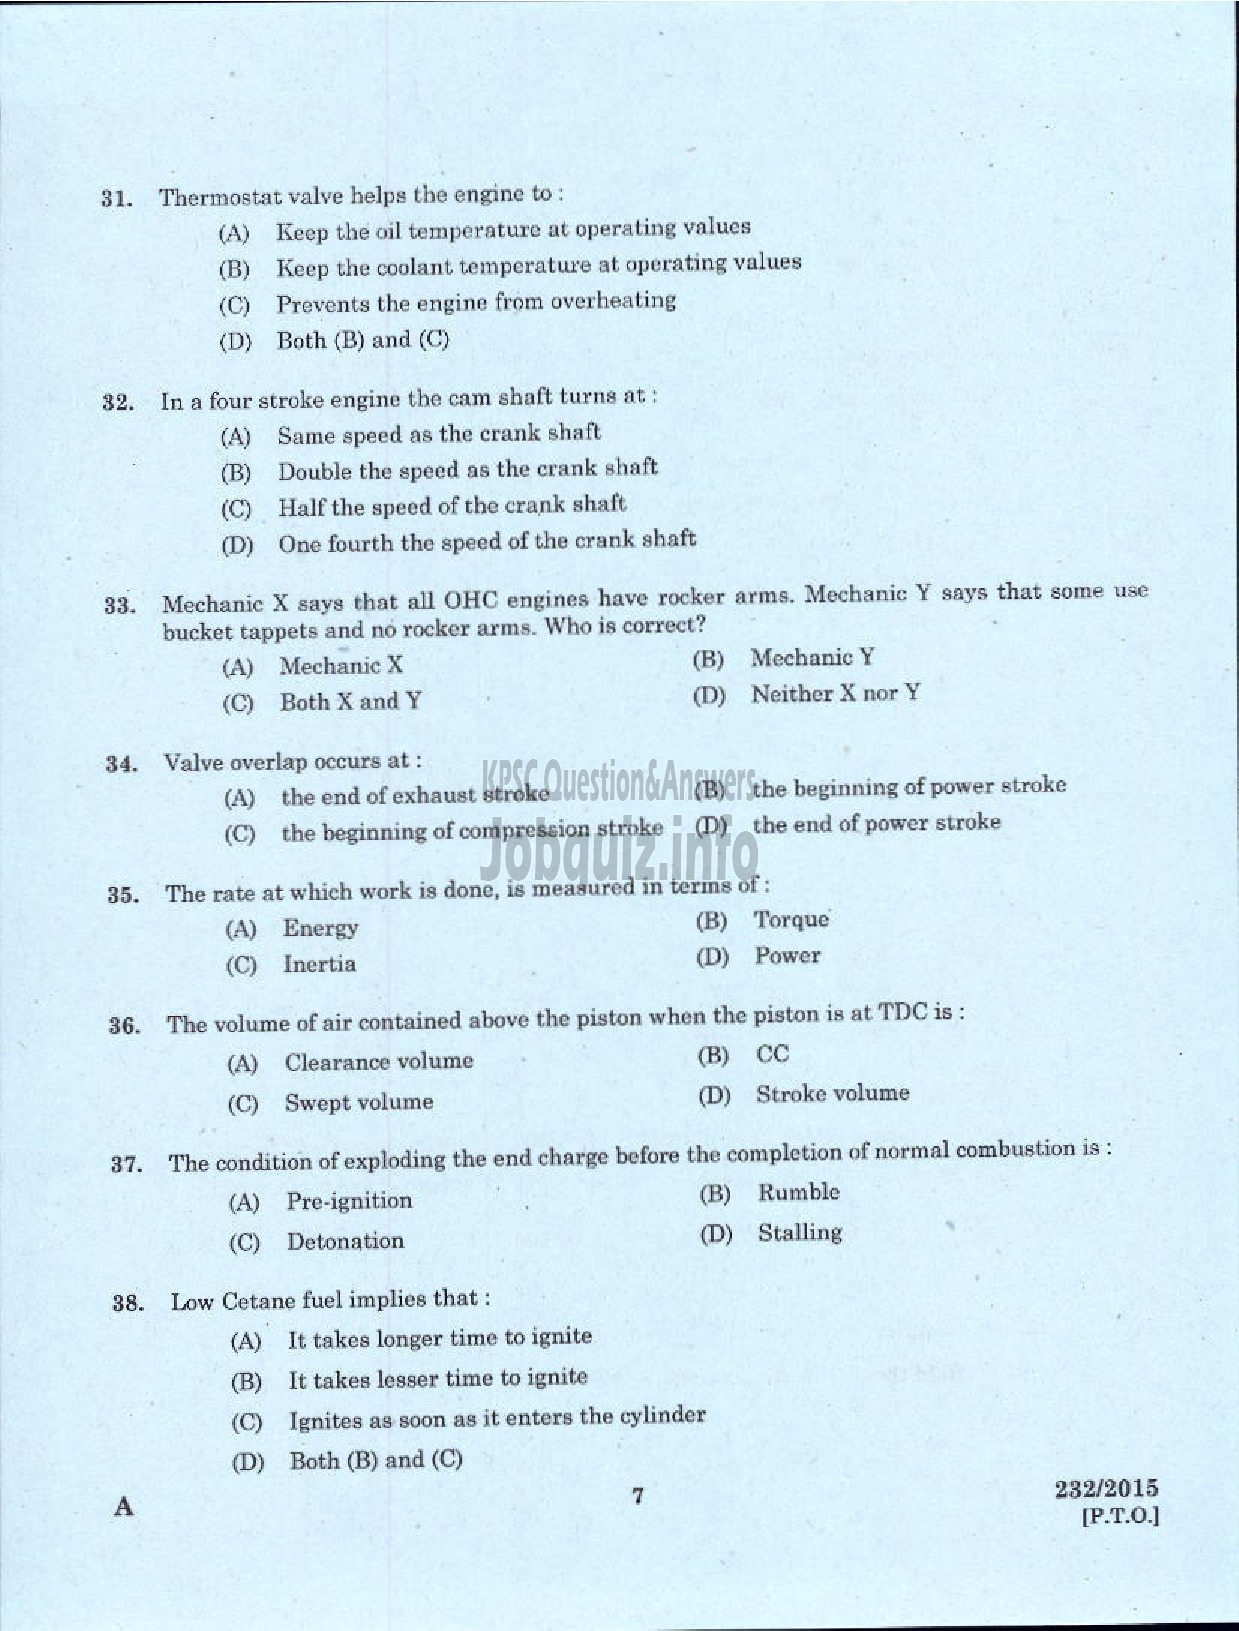 Kerala PSC Question Paper - MOTOR MECHANIC/STORE ASSISTANT GROUND WATER-5